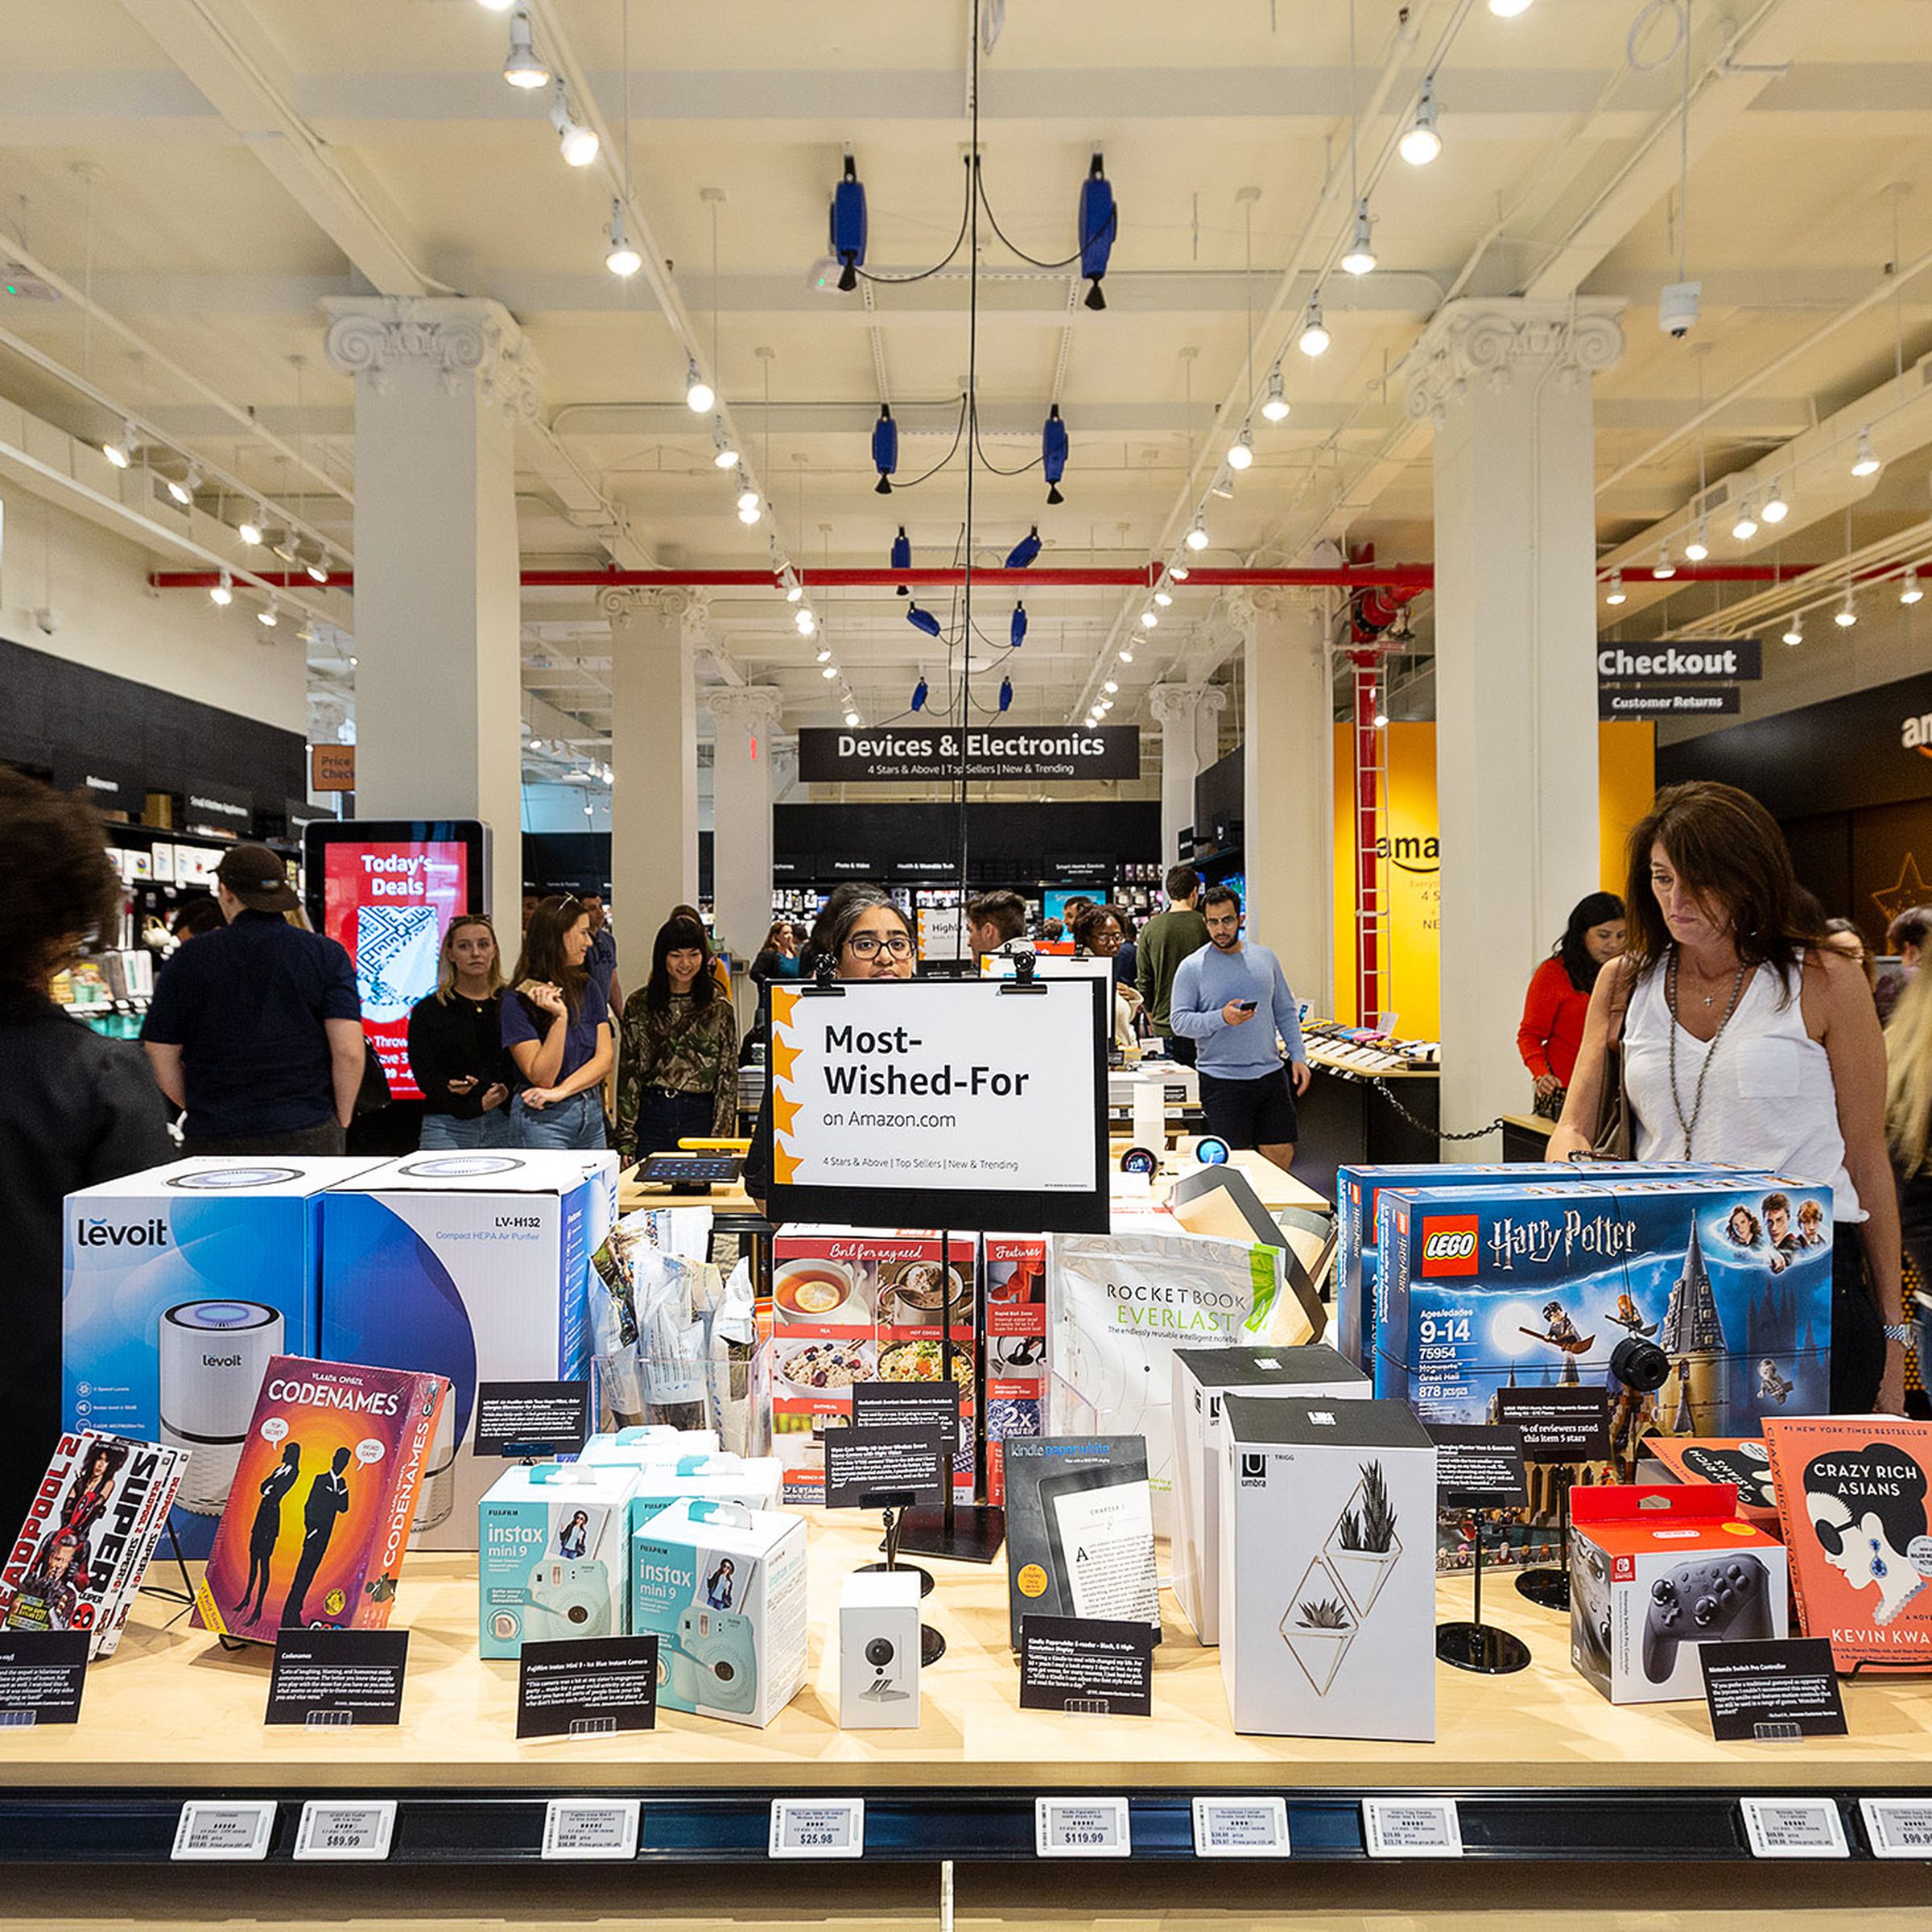 Opening day at the Amazon 4-Star brick-and-mortar store located in Soho in New York City.